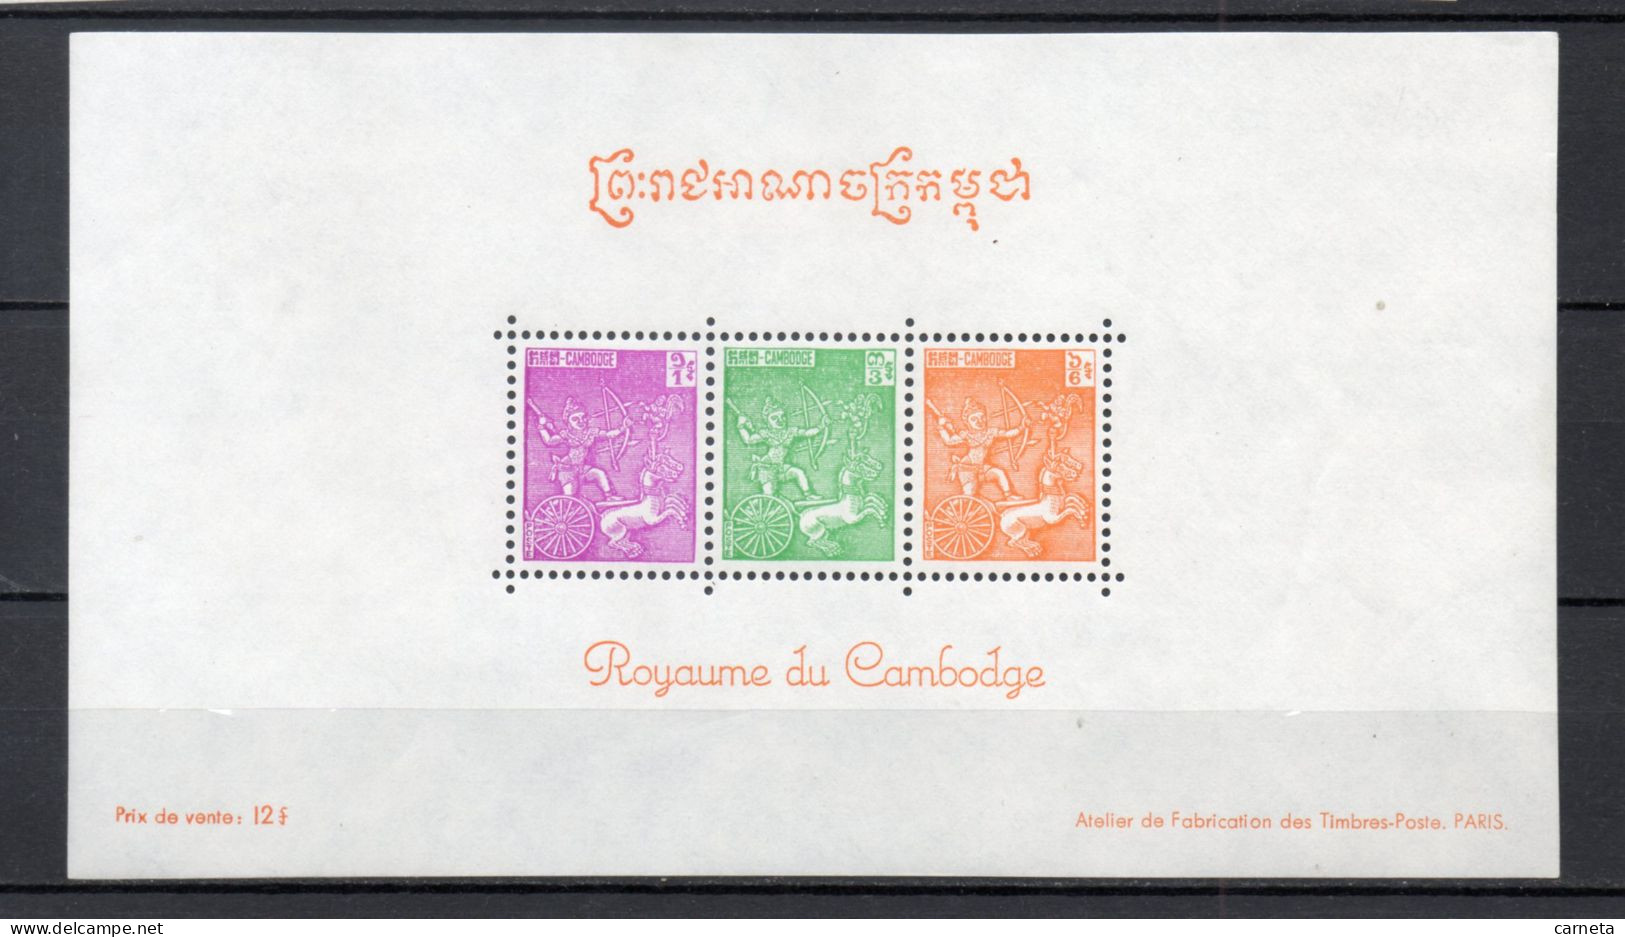 CAMBODGE  BLOC N° 19    NEUF SANS CHARNIERE   COTE  4.50€    HOMMAGE AUX COMBATTANTS - Cambodia